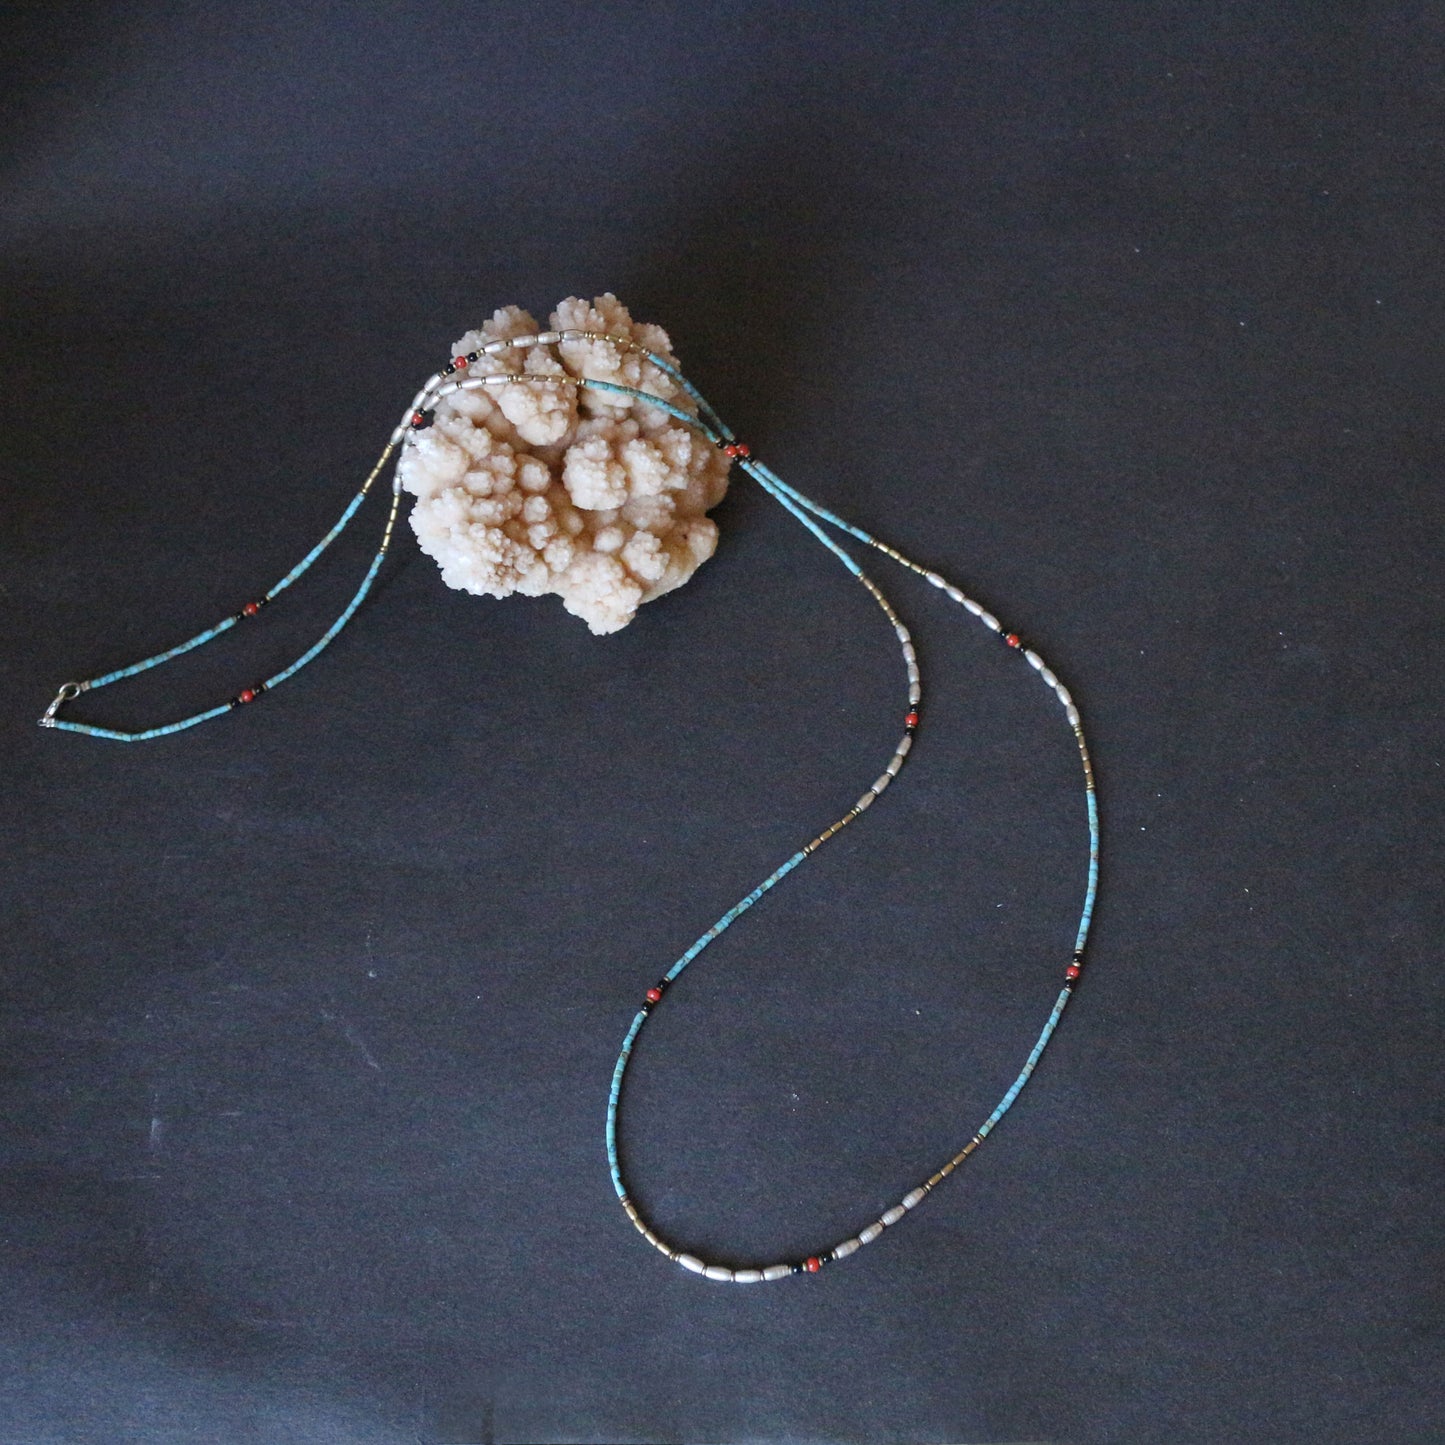 Turquoise Long Necklace